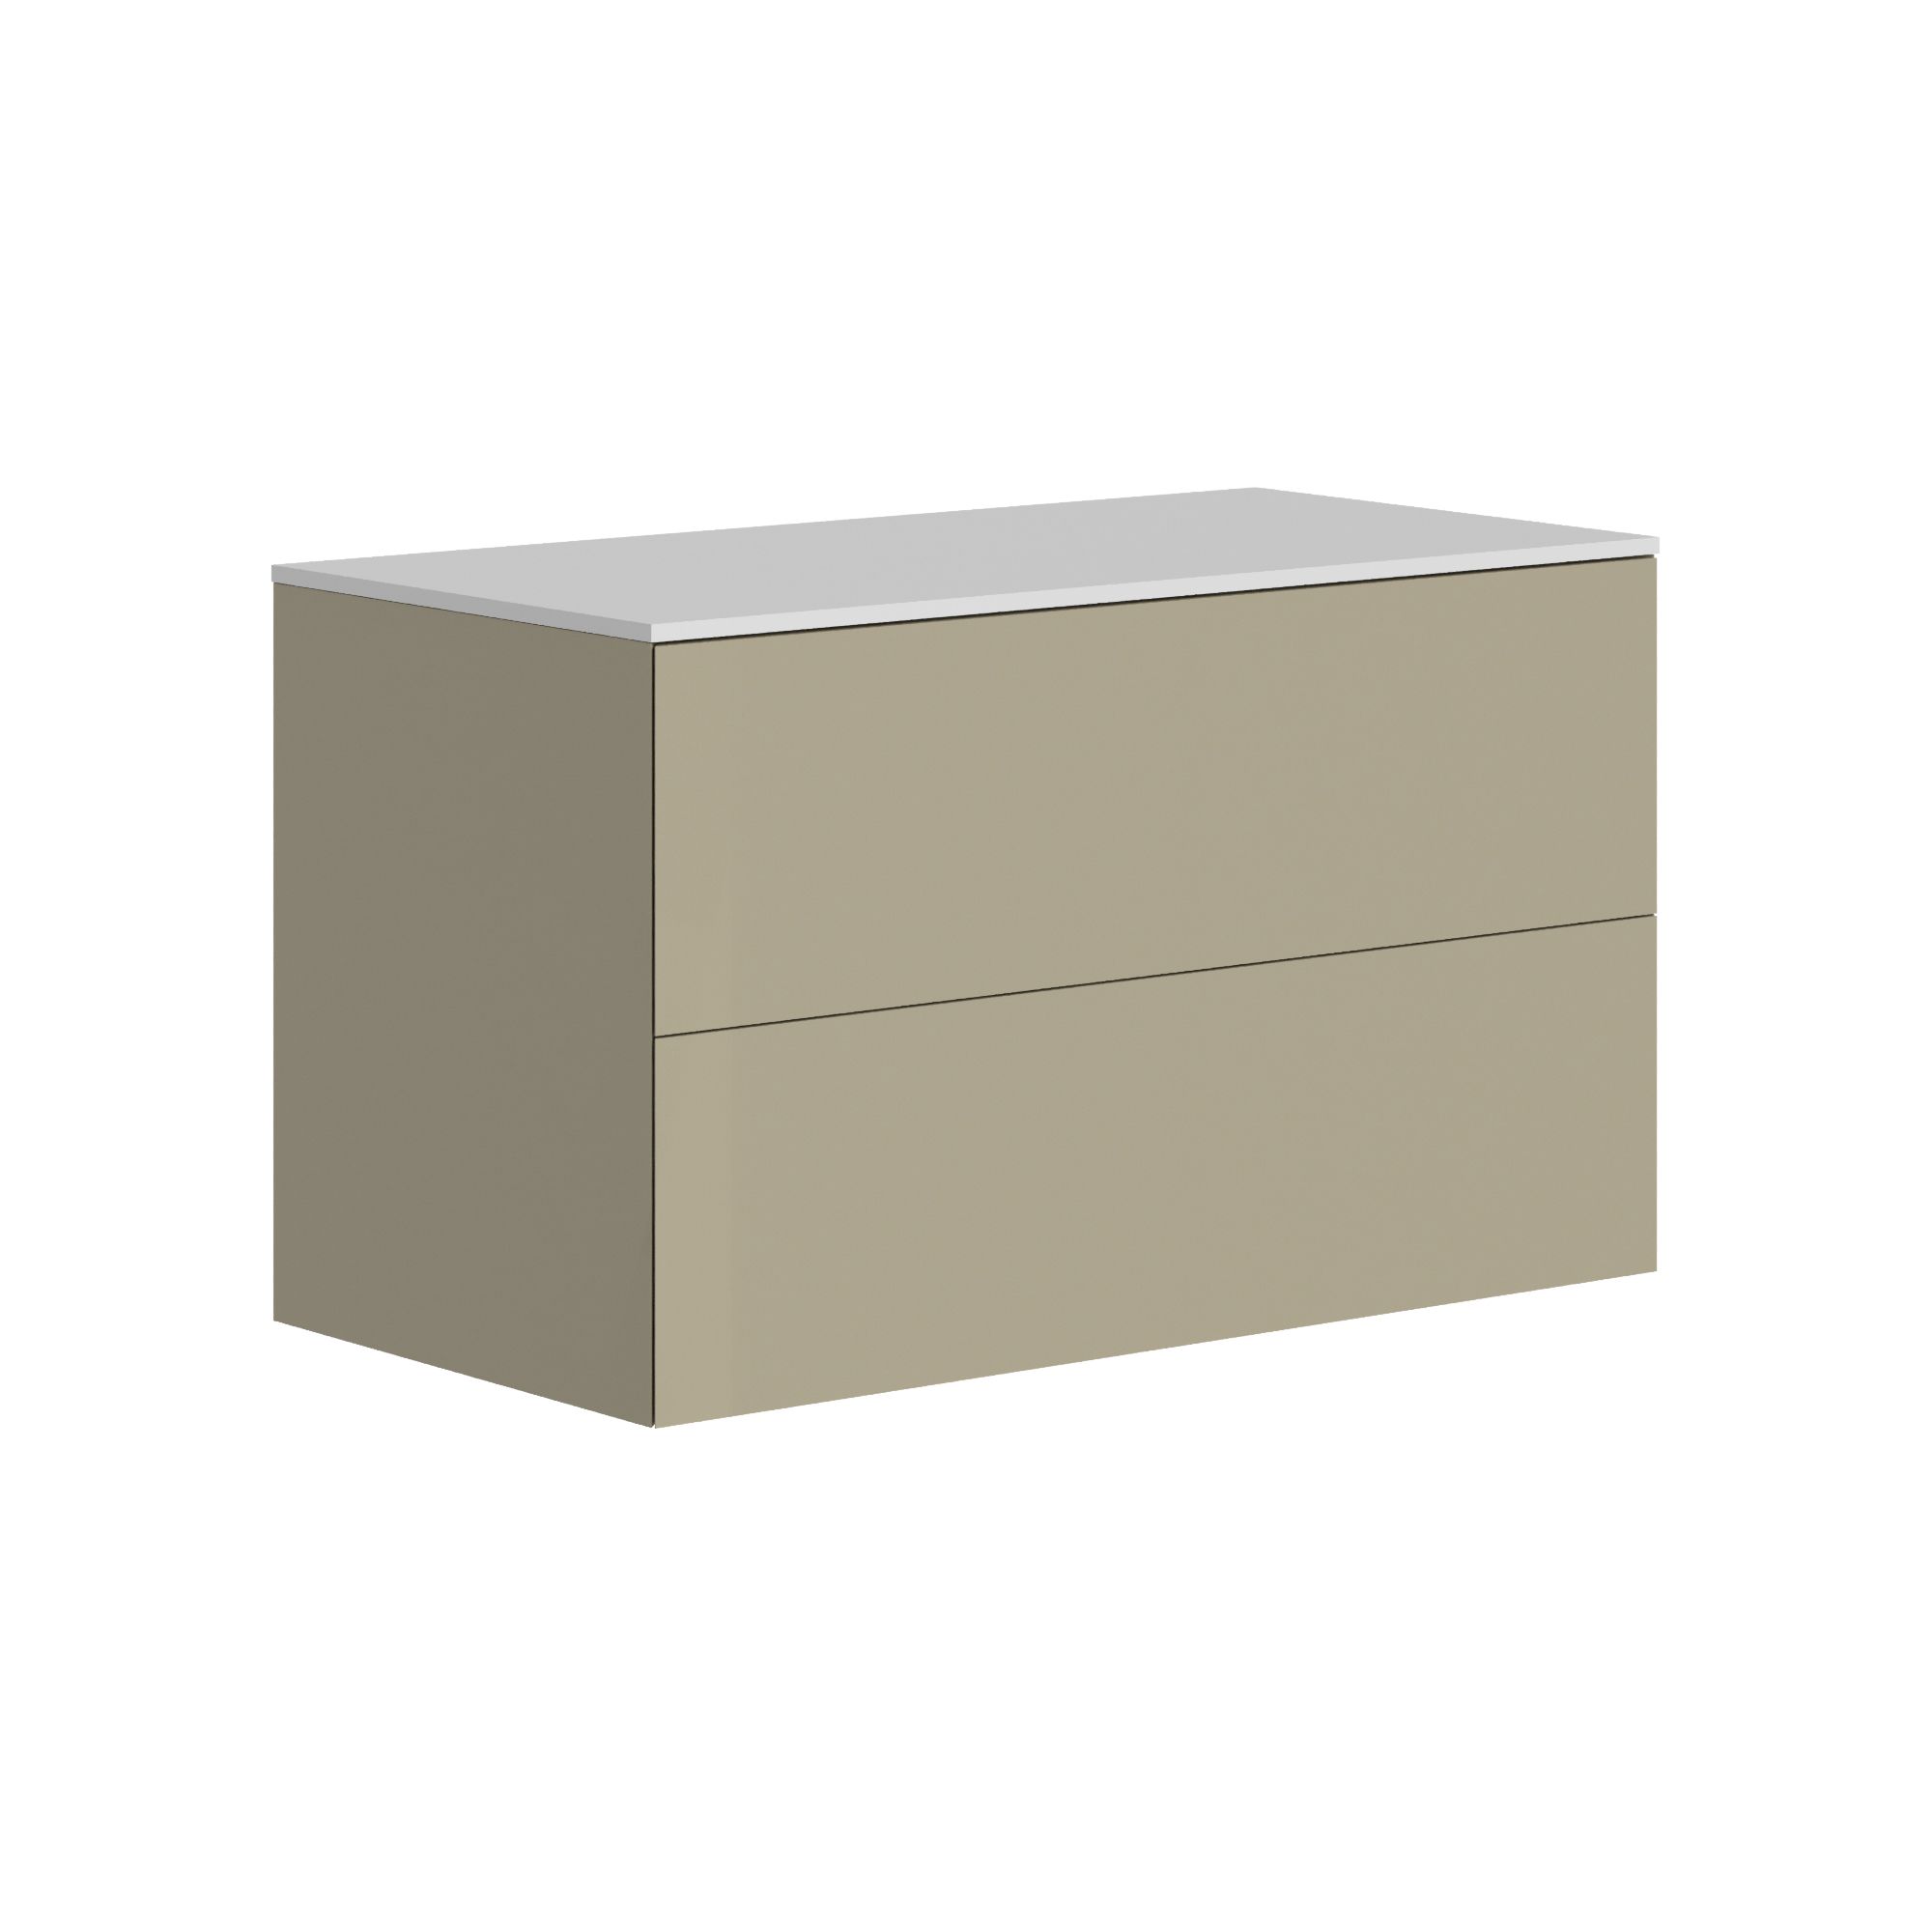 The Ellery Washbasin Push Open Unit 900x520mm with Solid Surface Countertop